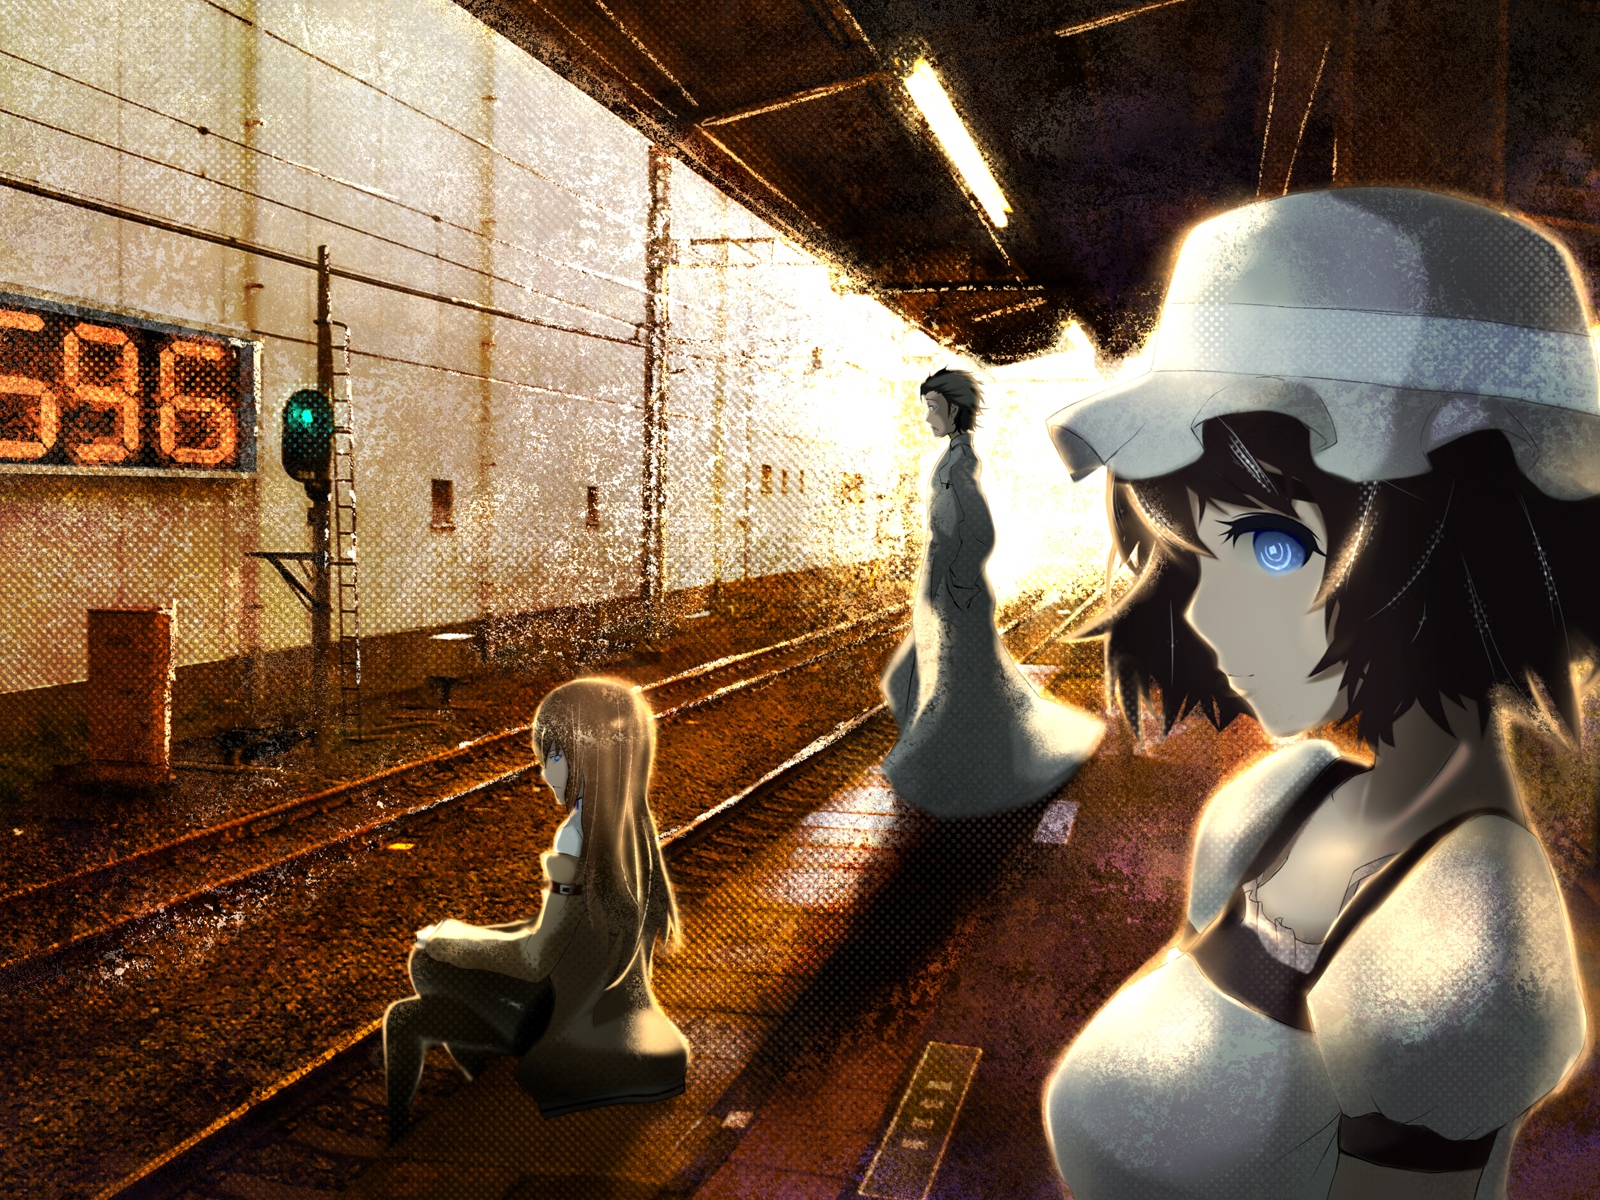 Free Download Steinsgate No0330 1600x10 For Your Desktop Mobile Tablet Explore 37 Steins Gate Wallpaper 1080p Steins Gate Wallpaper Hd Gate Anime Wallpaper Steins Gate Wallpaper Iphone